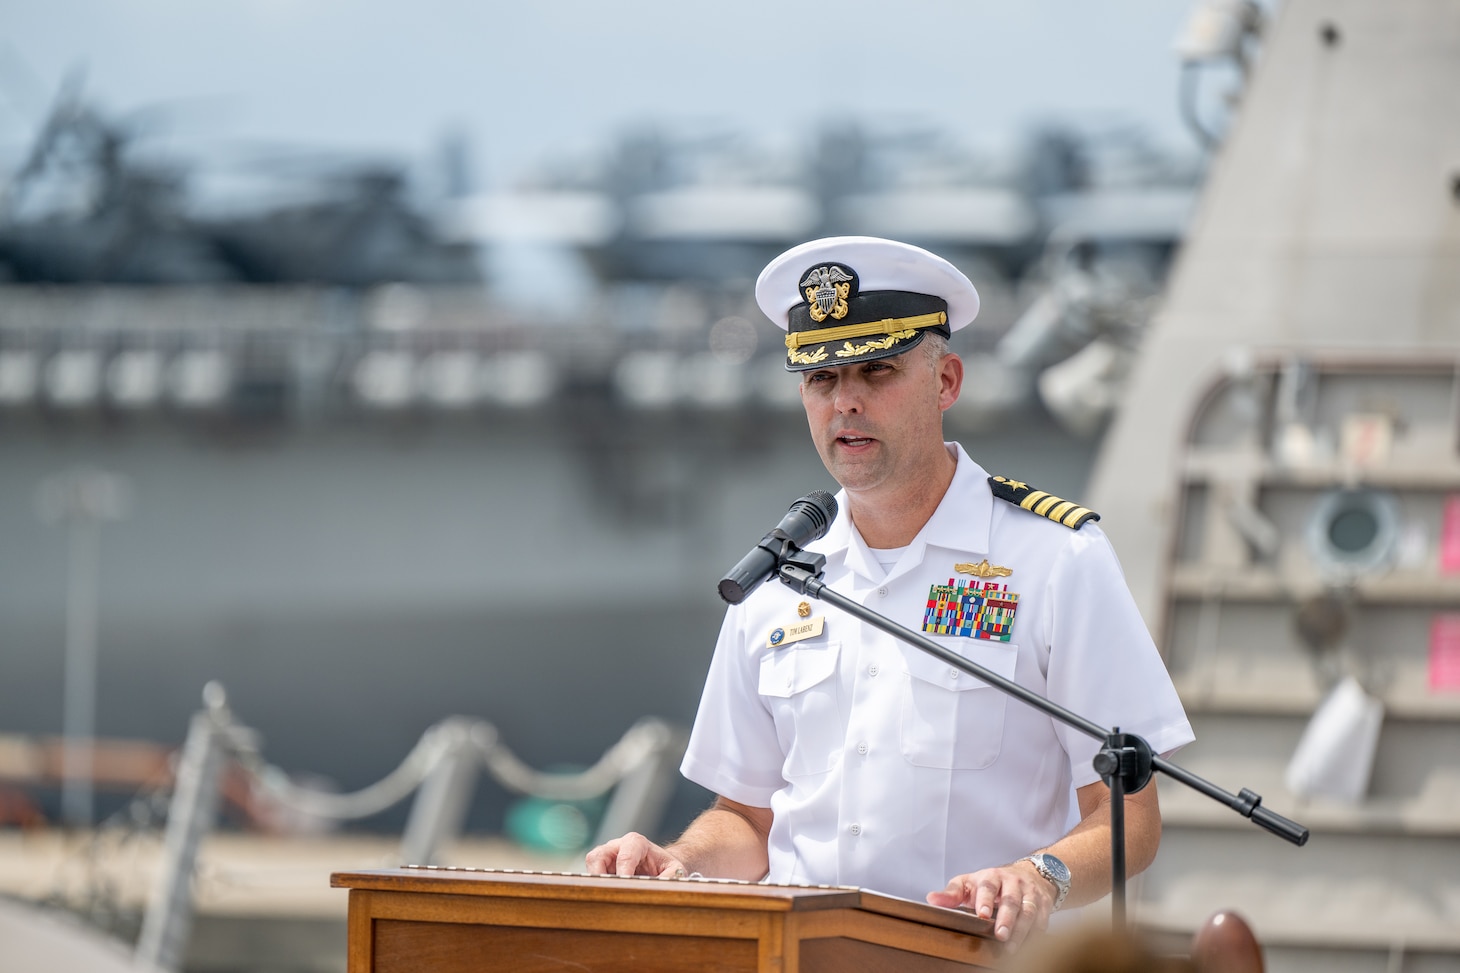 Capt. Tim LaBenz, commodore, Destroyer Squadron (DESRON) 7, speaks during the DESRON 7 change of command ceremony aboard the Independence-variant littoral combat ship USS Charleston (LCS 18) where he relieved Capt. Tom Ogden in Singapore, Sept. 2, 2022. Charleston, part of DESRON 7, is on a rotational deployment, operating in the U.S. 7th Fleet area of operations to enhance interoperability with partners and serve as a ready-response force in support of a free and open Indo-Pacific region. As the U.S. Navy’s destroyer squadron forward-deployed in Southeast Asia, DESRON 7 serves as the primary tactical and operational commander of littoral combat ships rotationally deployed to Singapore, Expeditionary Strike Group (ESG) 7’s Sea Combat Commander, and builds partnerships through training exercises and military-to-military engagements.